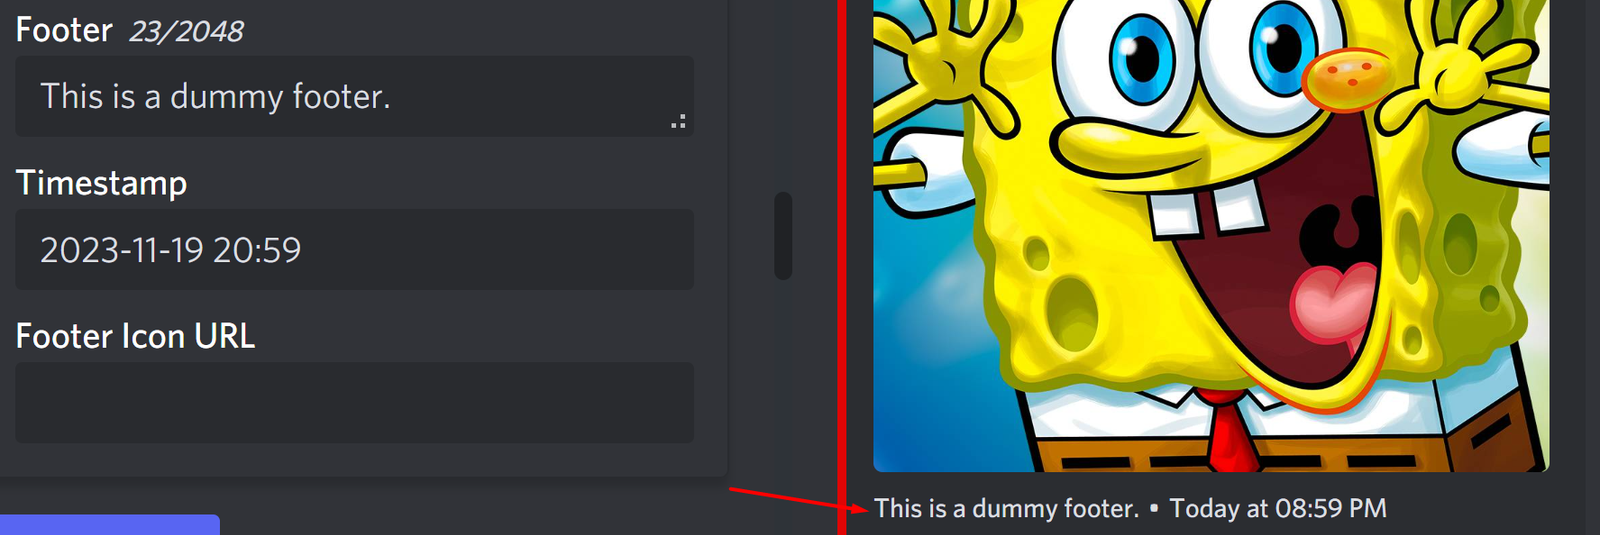 Footer in Discohook Discord PC